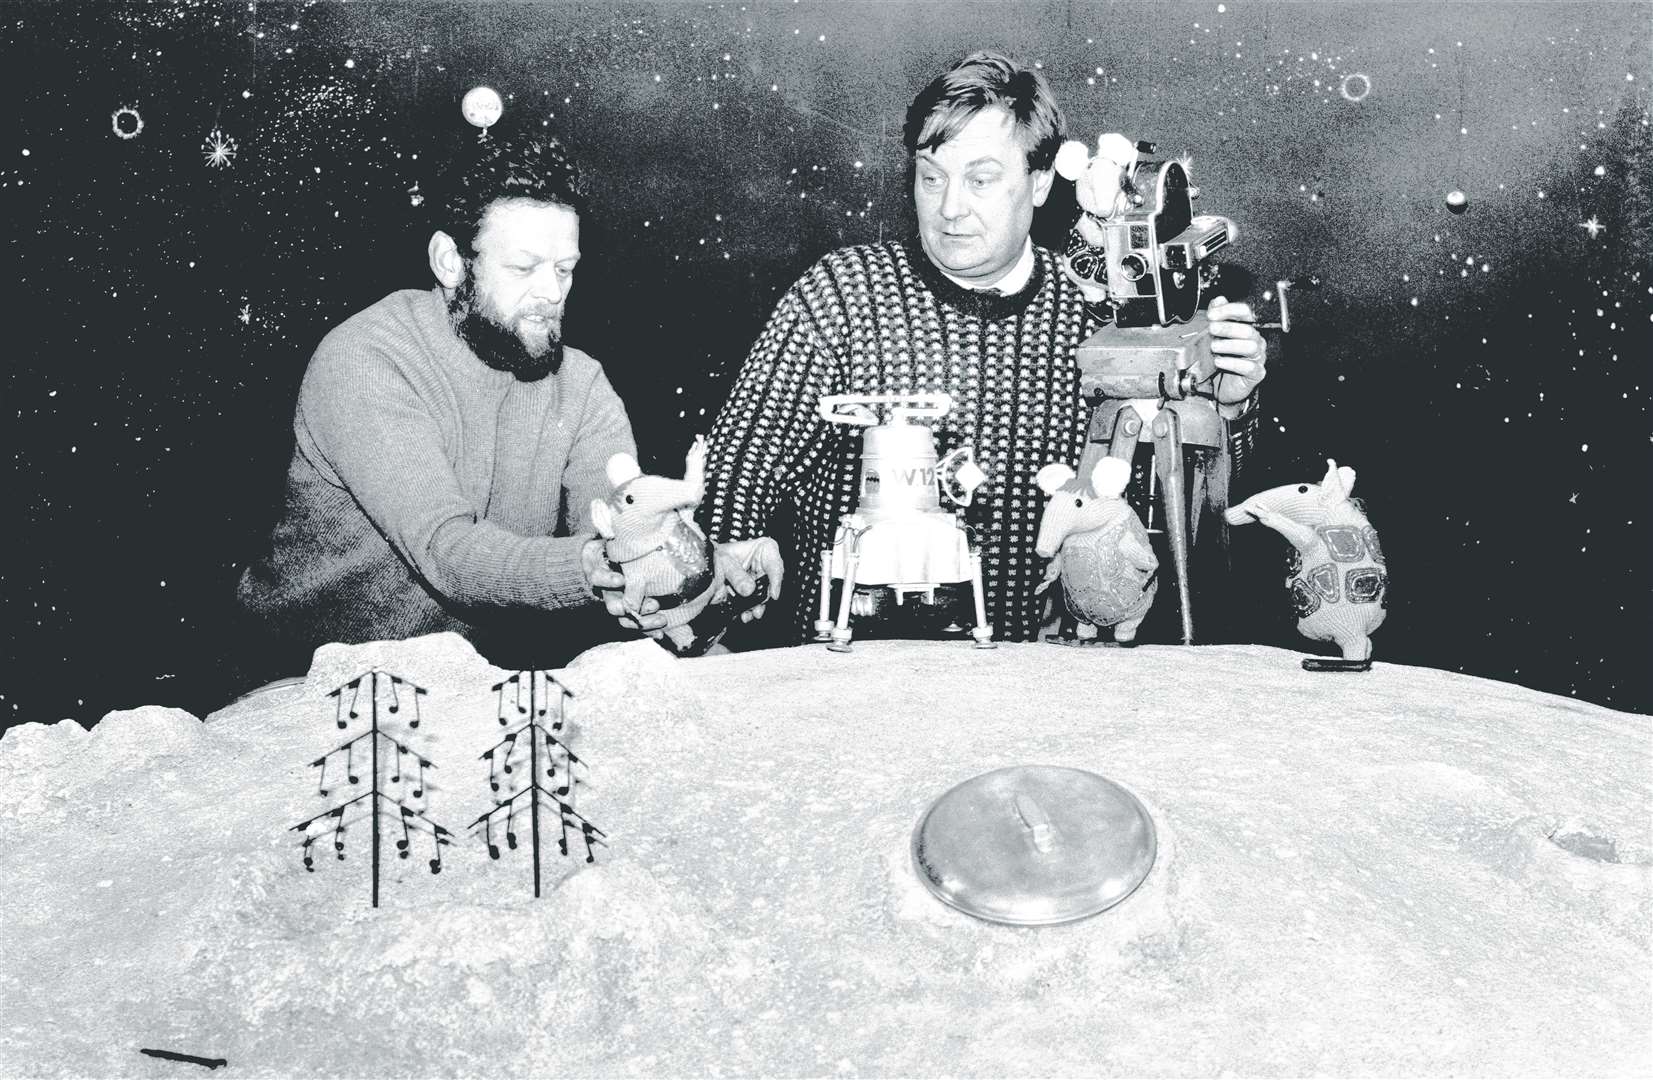 Peter Firmin (left) and Oliver Postgate at work on The Clangers in their Blean studio in 1969